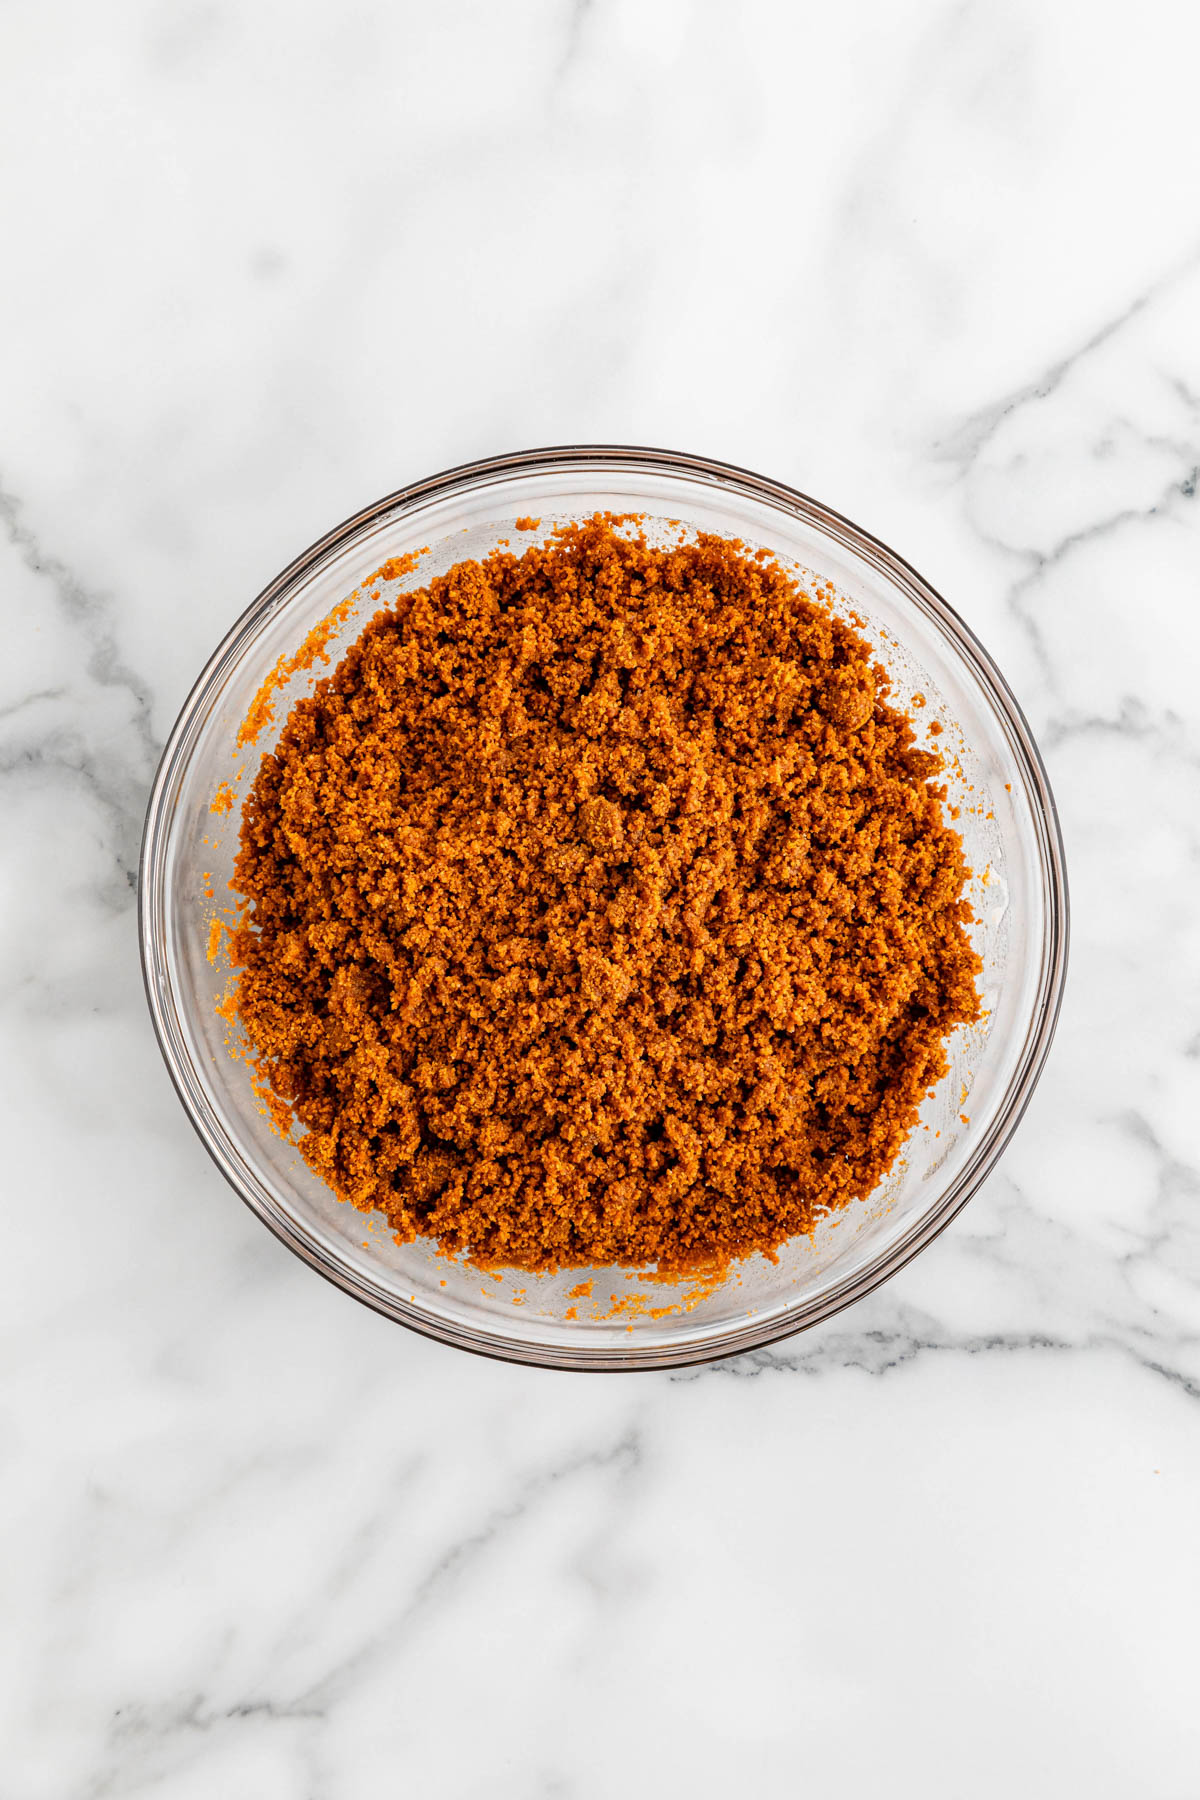 A glass bowl filled with ingredients for Biscoff crust